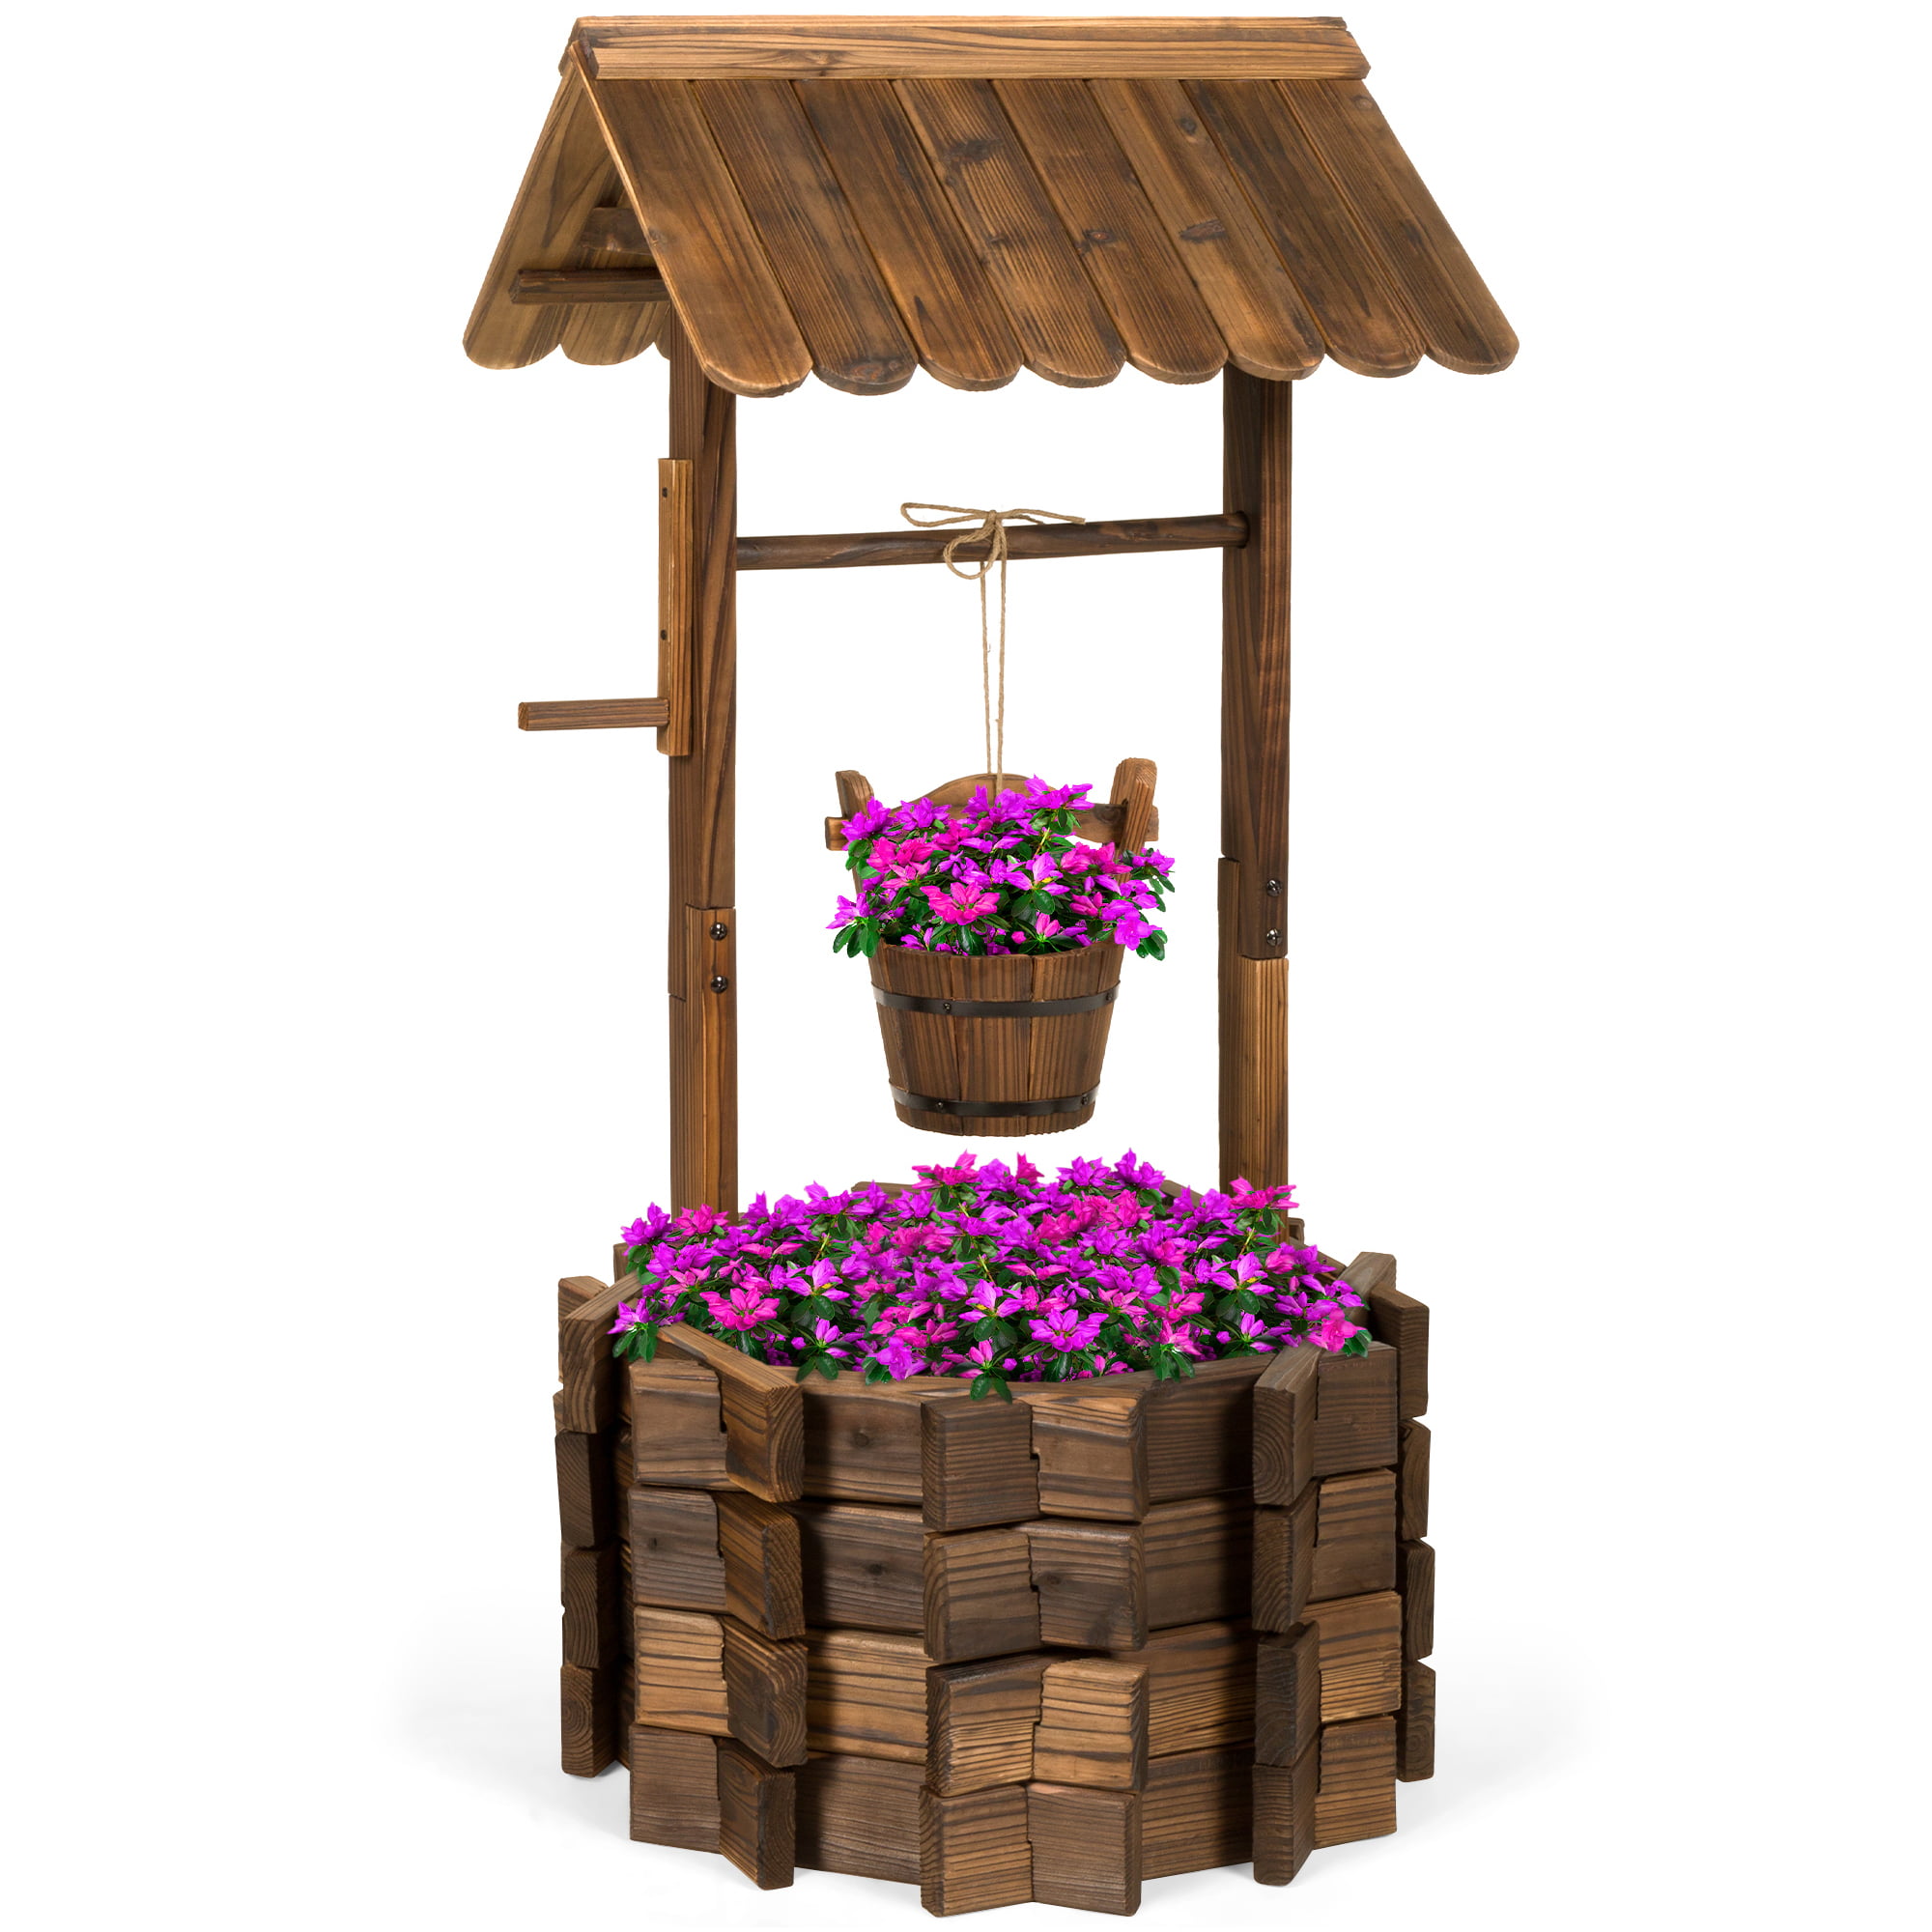 Best Choice Products Set of 3 Rustic Wood Bucket Barrel Flower 